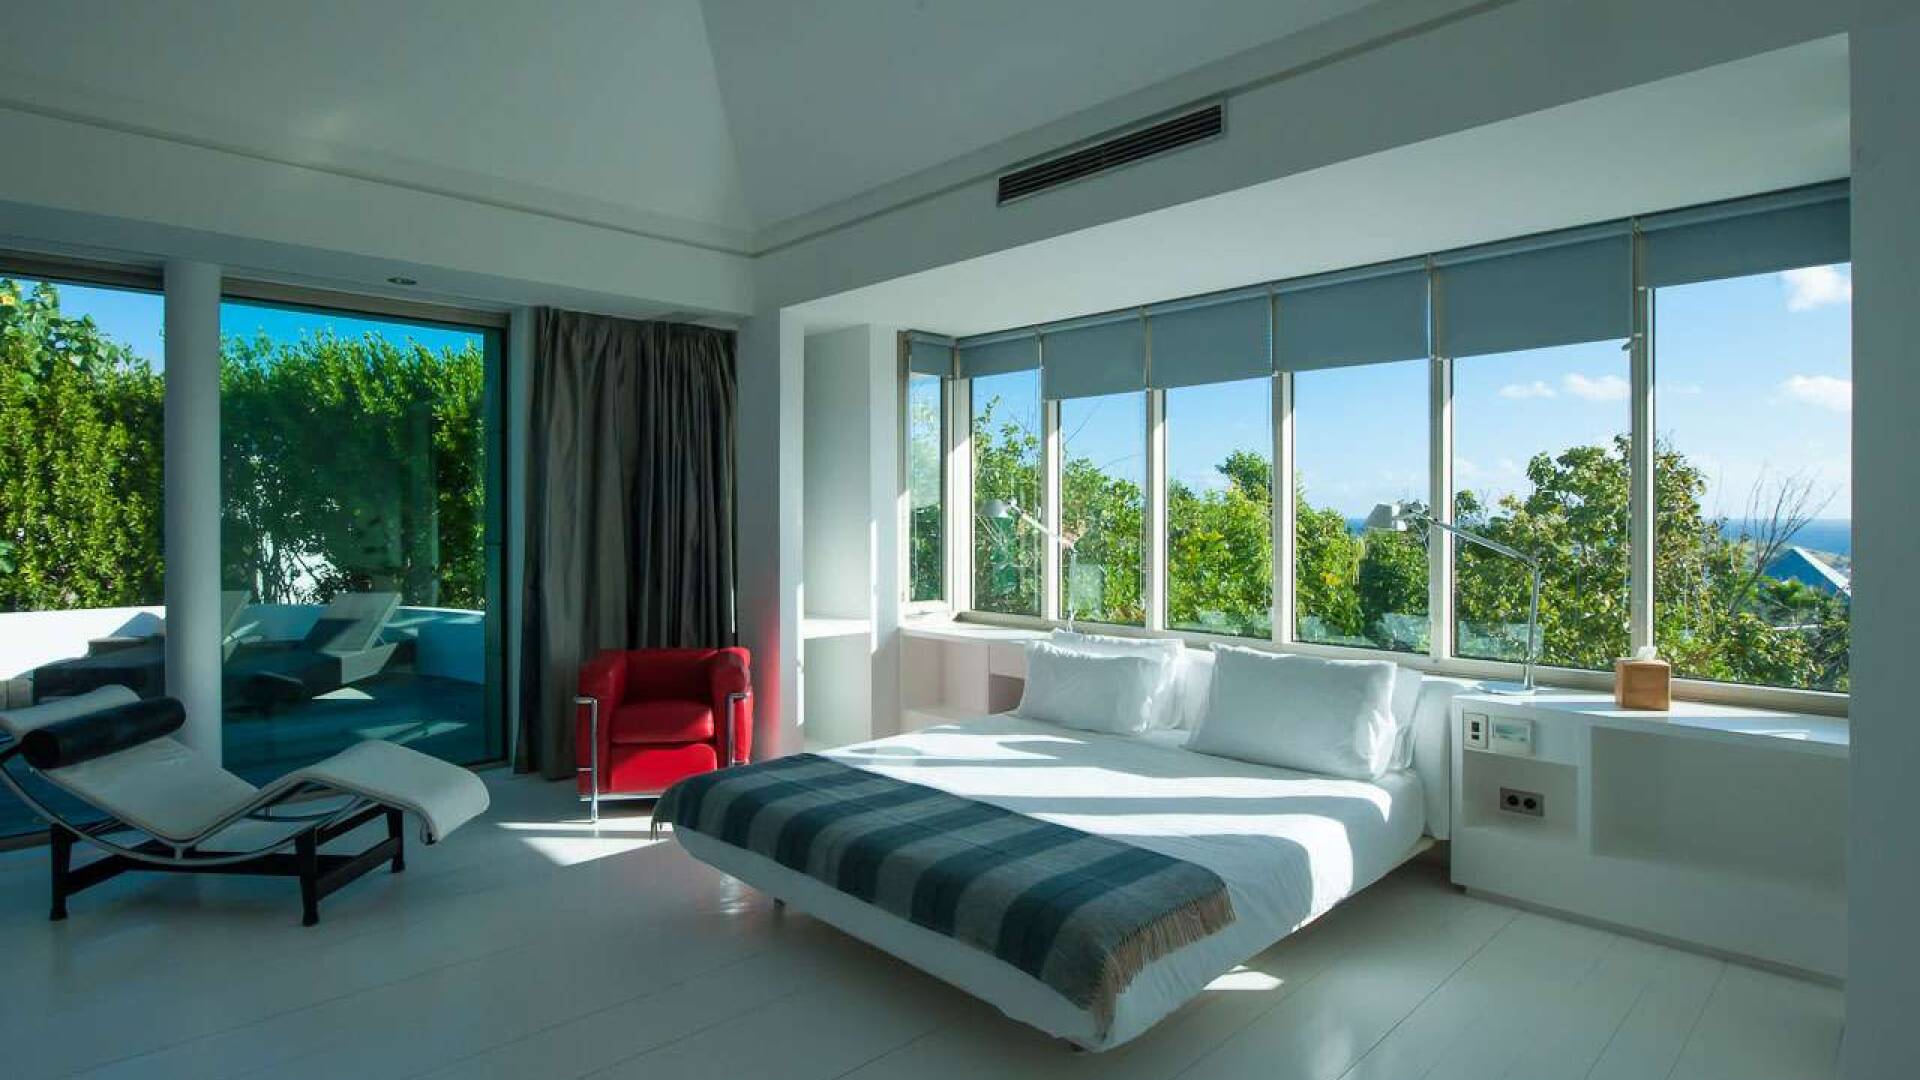 Bedroom at WV PYR, Pointe Milou, St. Barthelemy